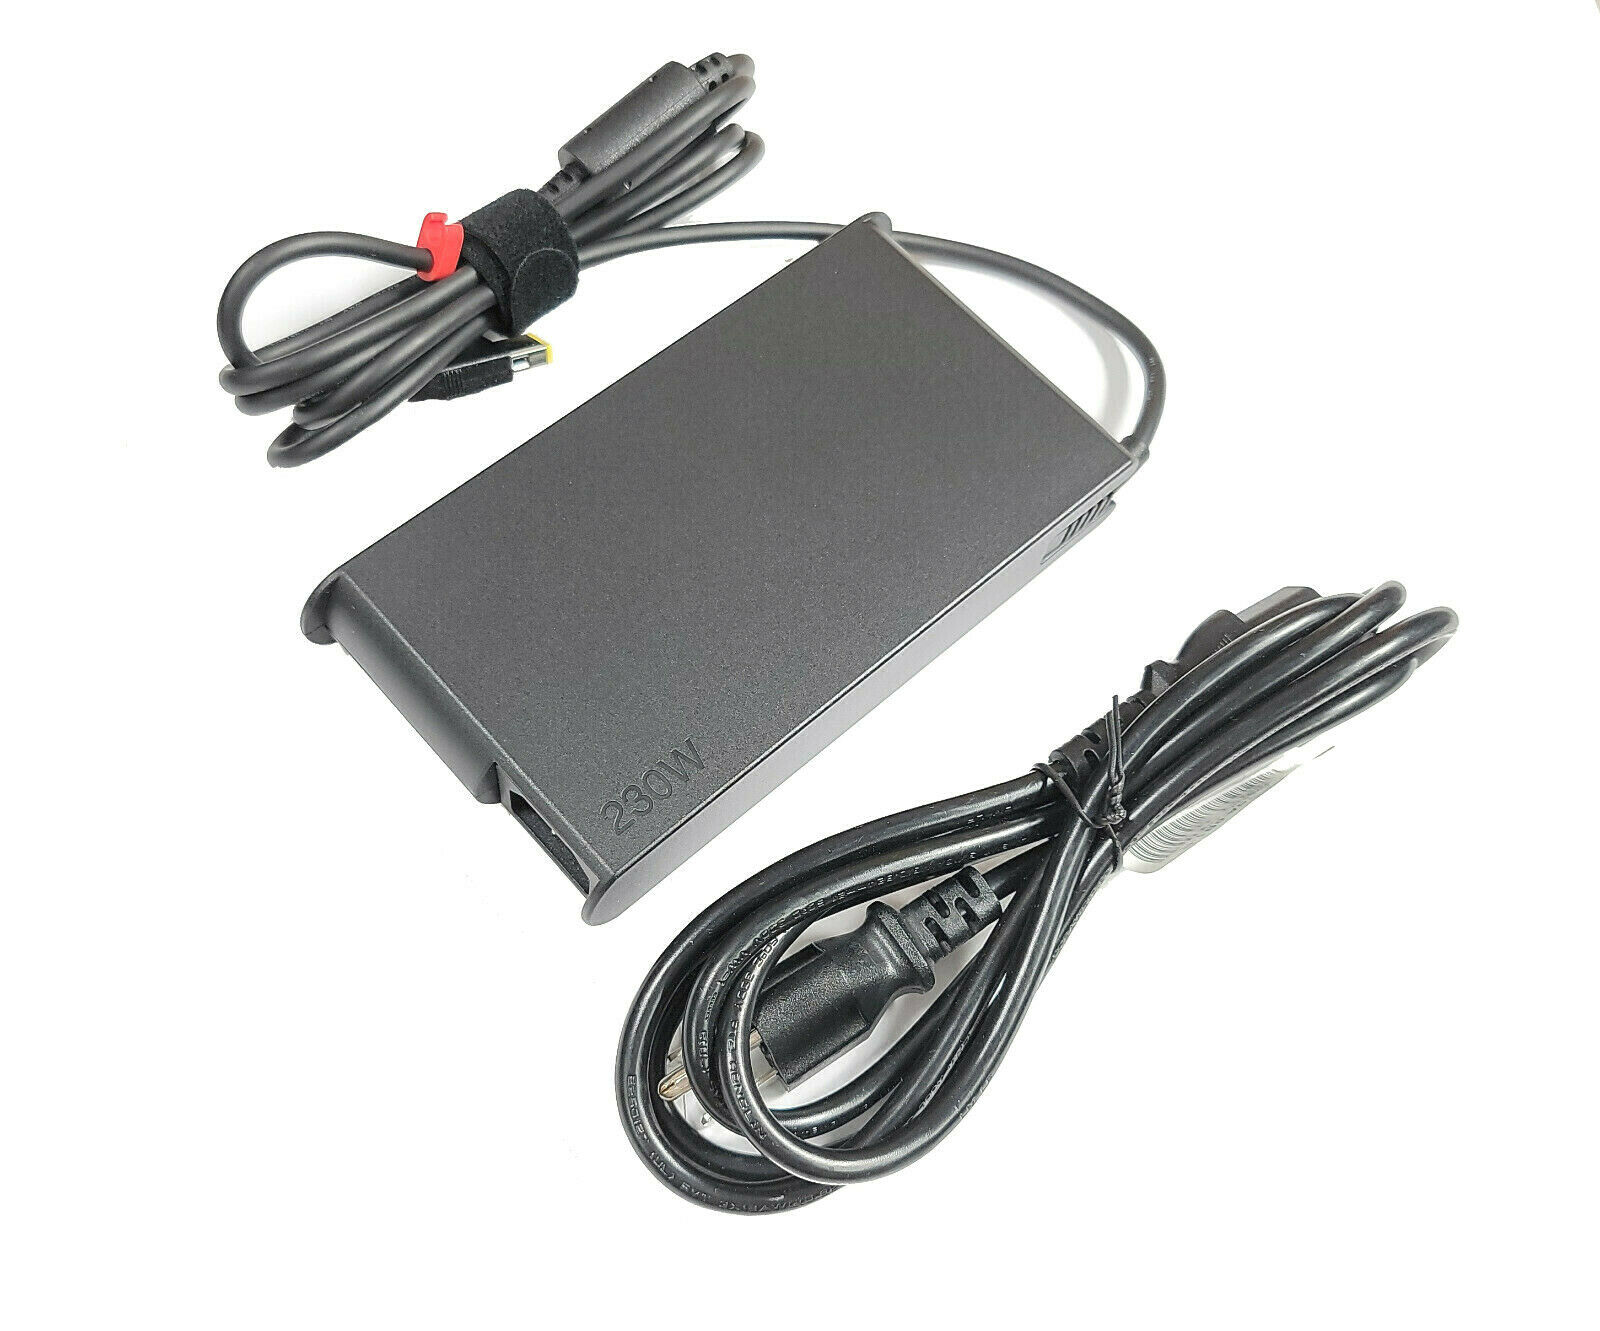 New Genuine 230W AC Power Charger for Lenovo Gaming Legion 7i 15IMH05 81YT0005US Country/Region of Manufacture: China